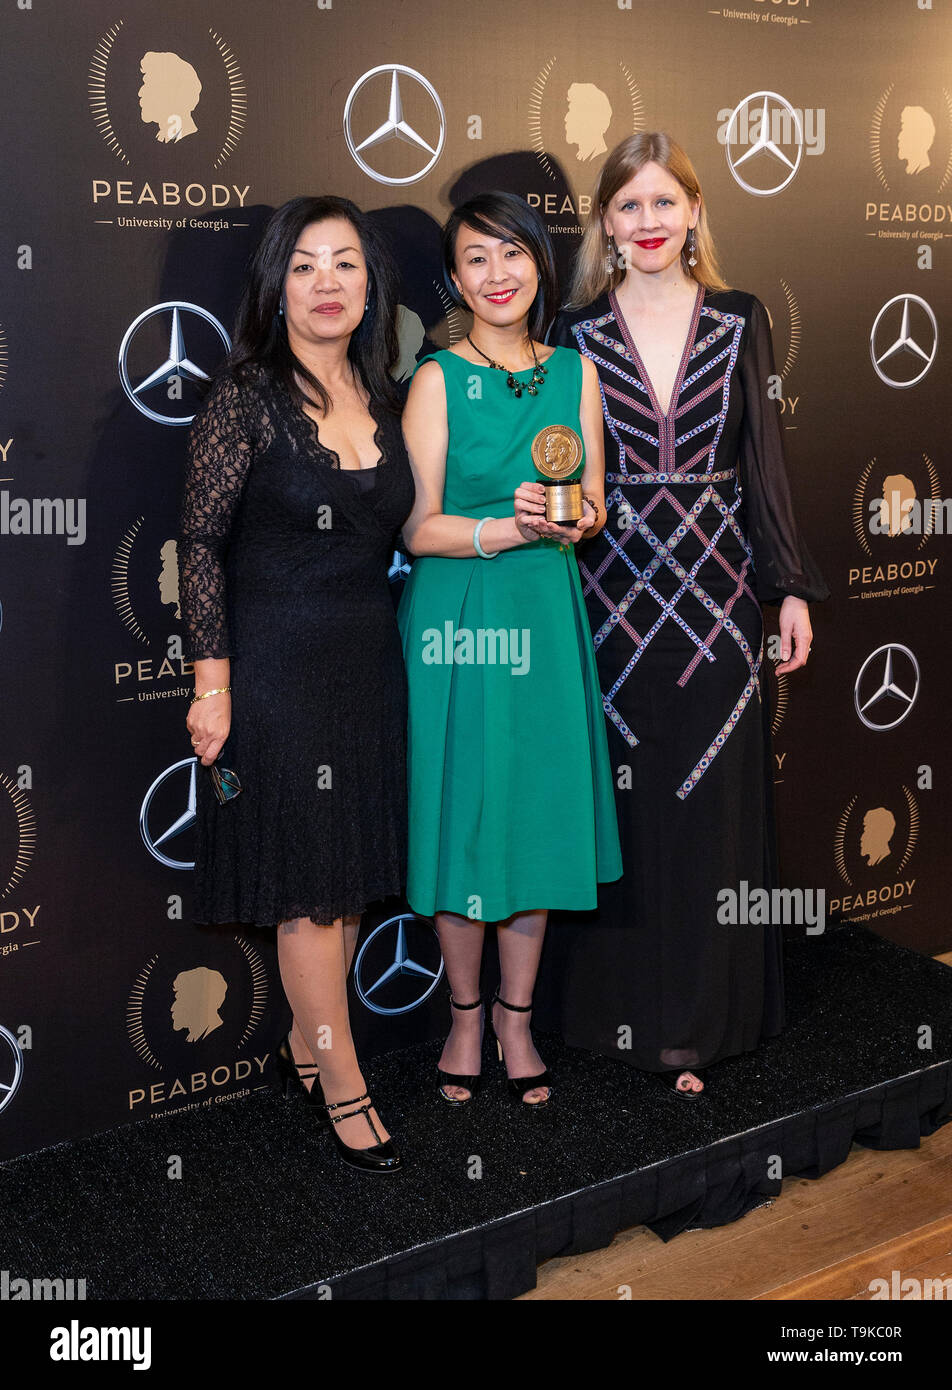 New York, United States. 18th May, 2019. Anita Lee, Tiffany Hsiung and  Justine Nagan pose in the press room of 78th Annual Peabody Awards Ceremony  at Cipriani Wall Street Credit: Lev Radin/Pacific